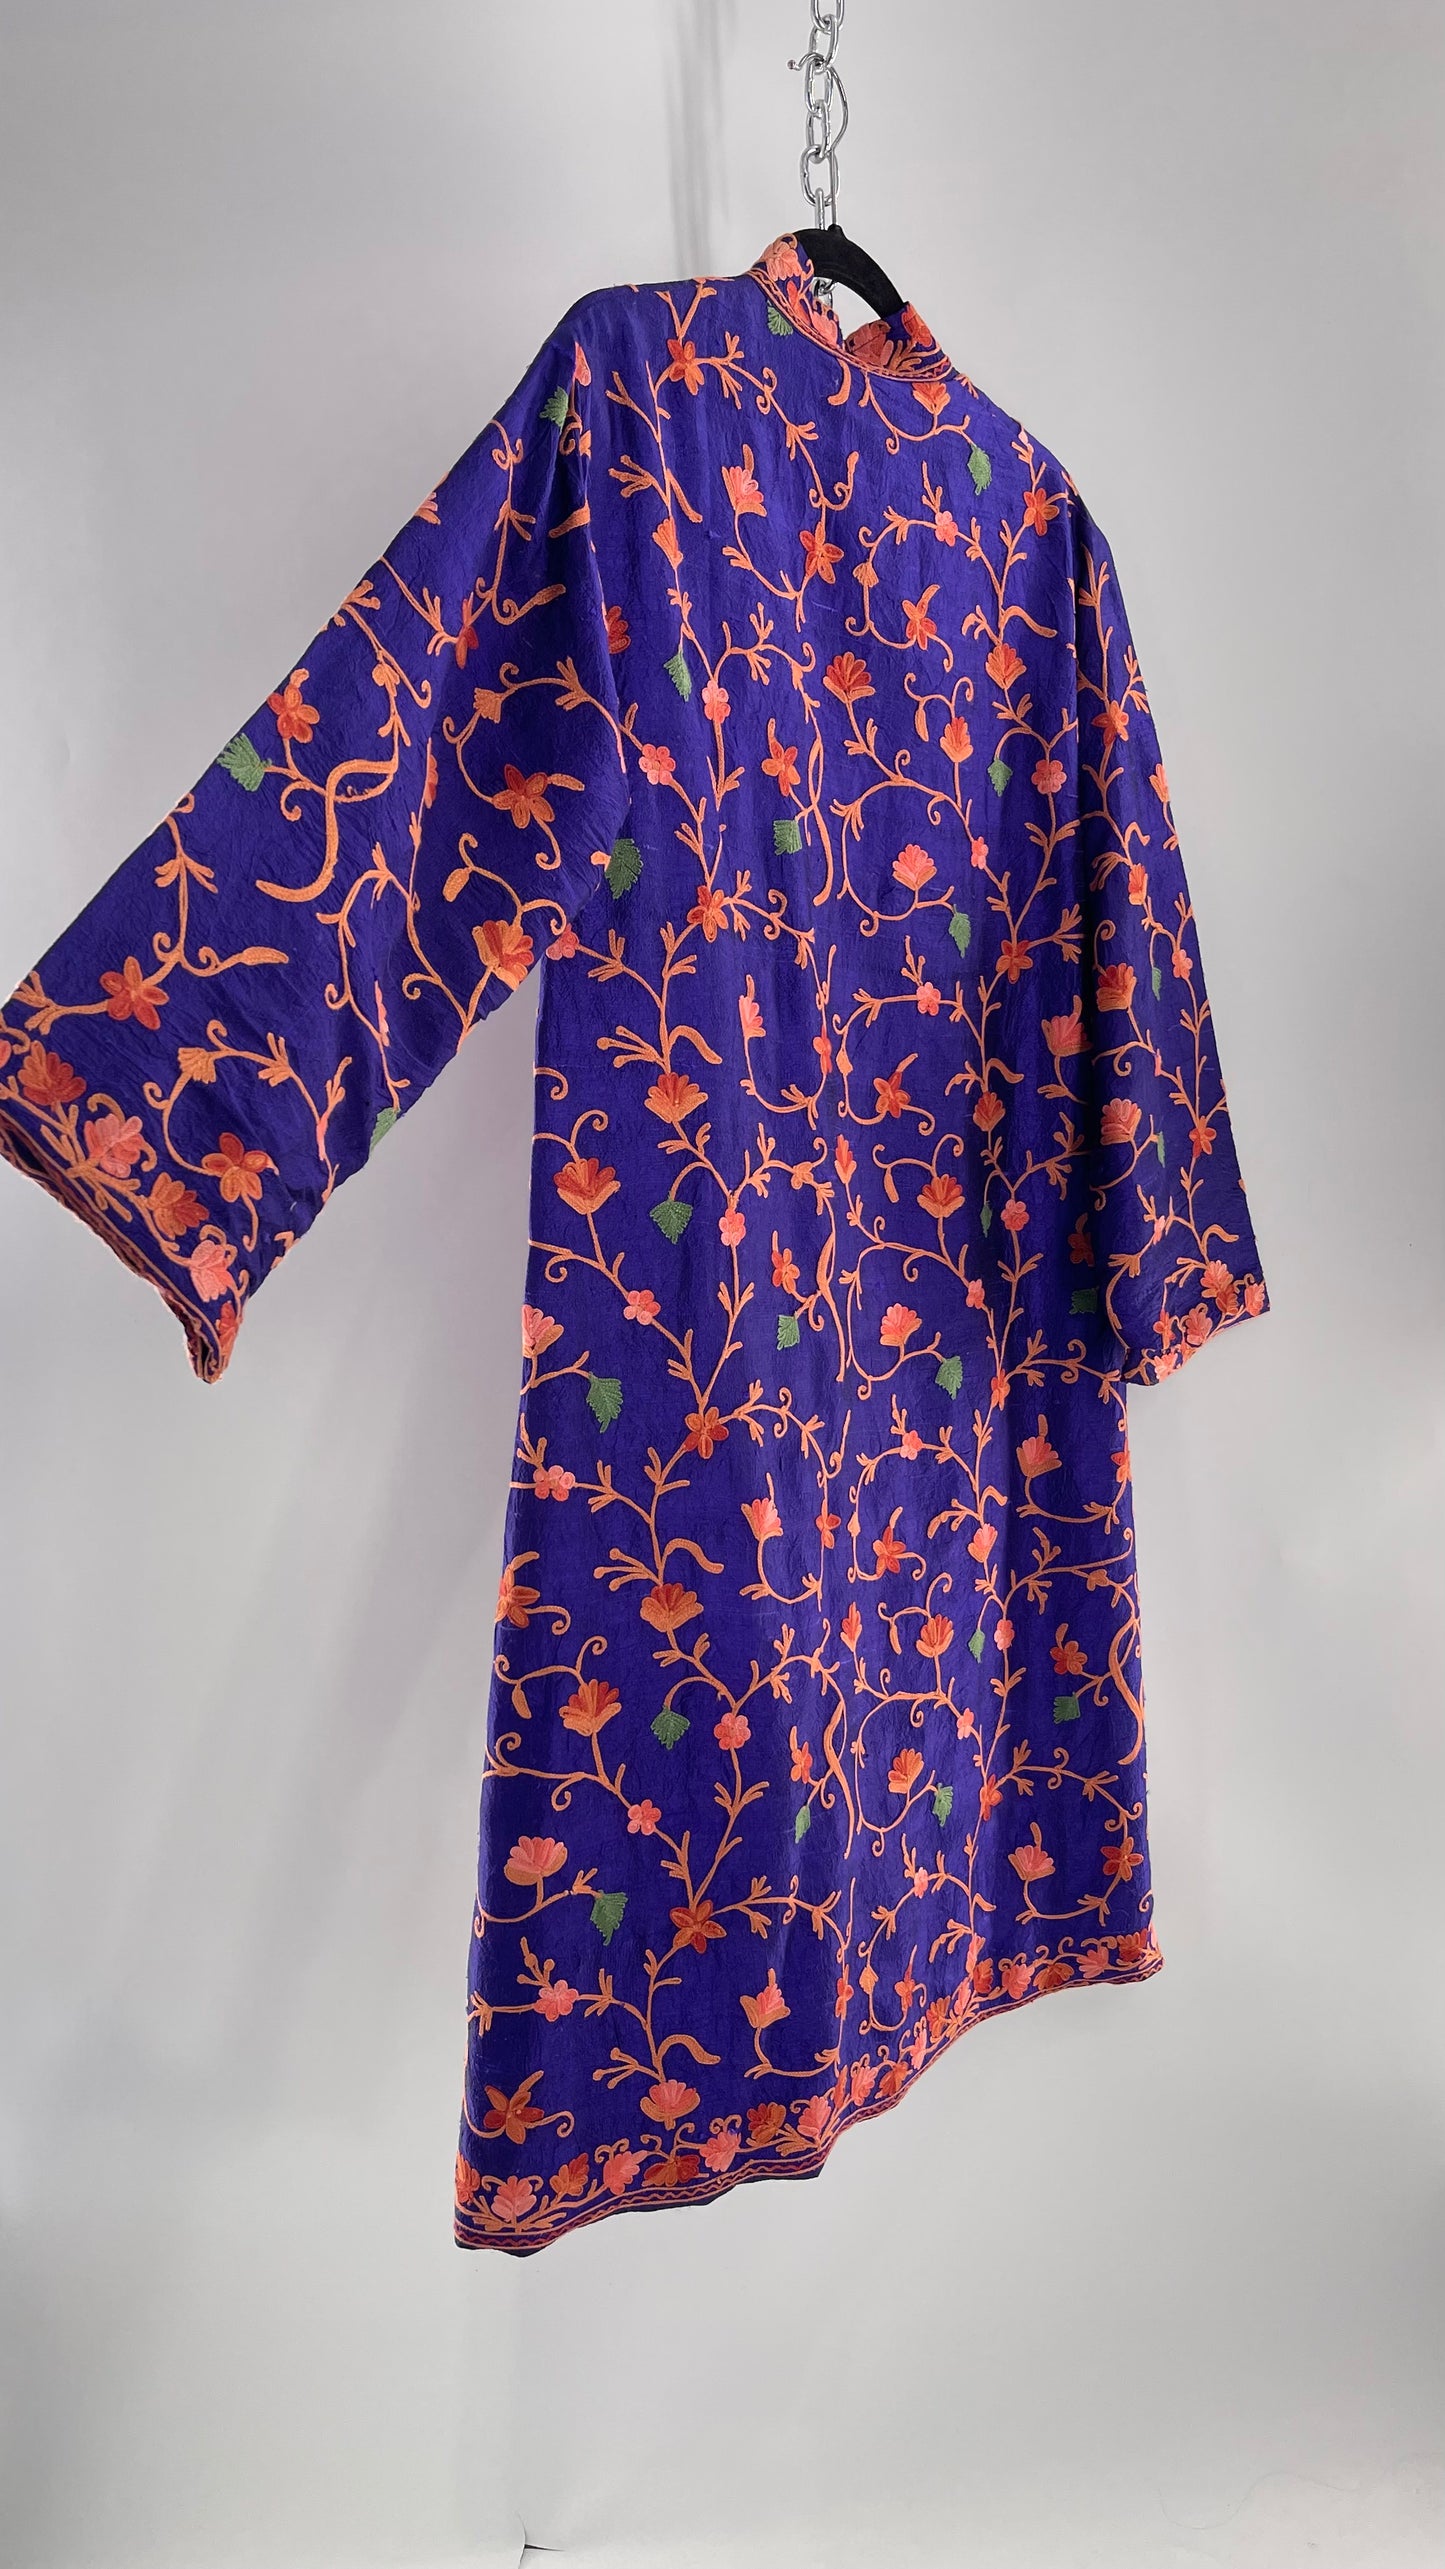 Vintage 1970s Indian Silk Long Purple Kashmiri Coat with Contrasting Embroidered Coral/Salmon Florals (S/M)